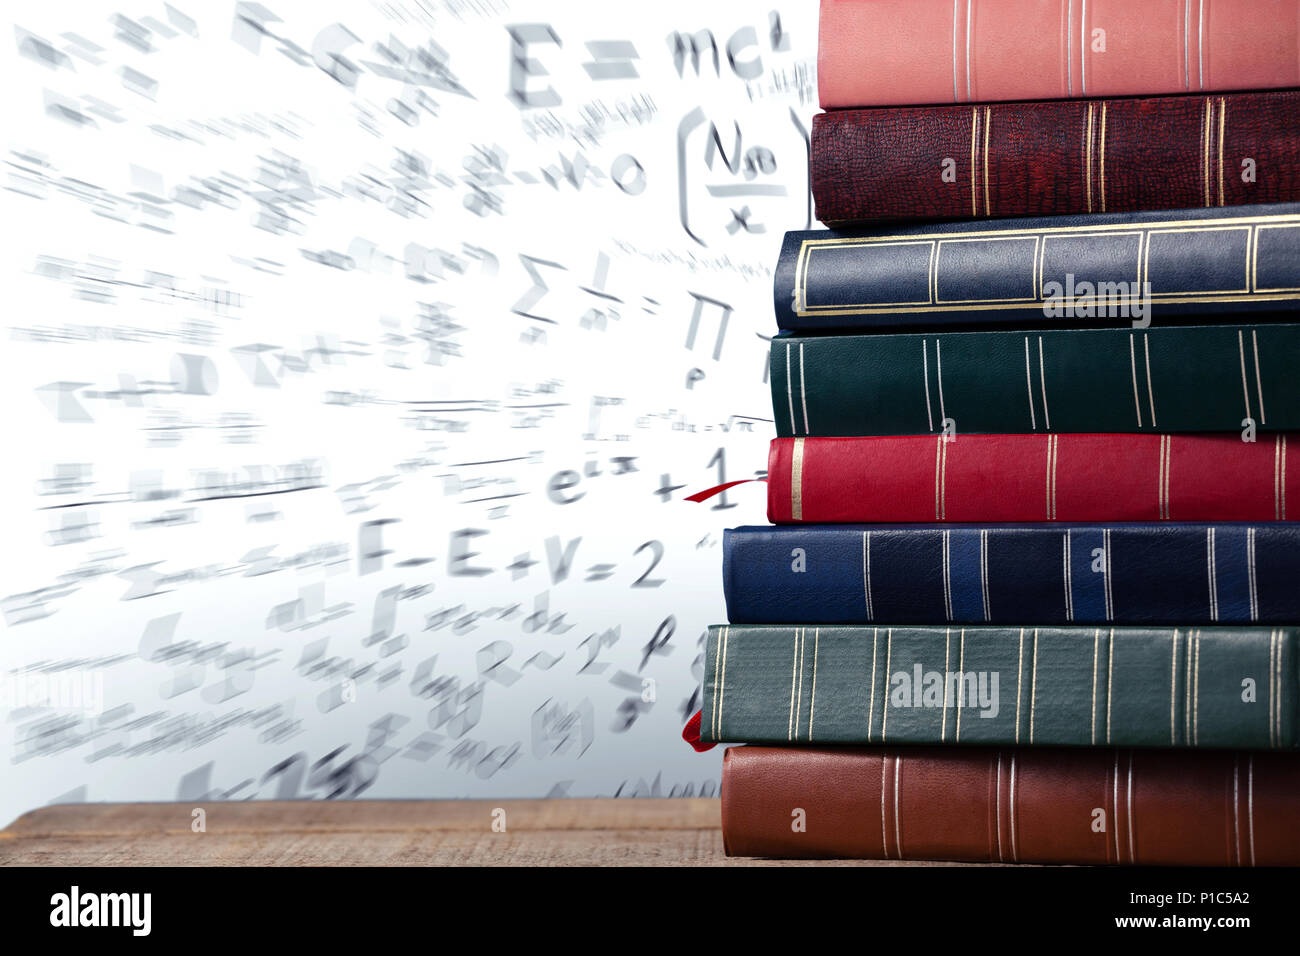 Stack of books on wooden table Stock Photo